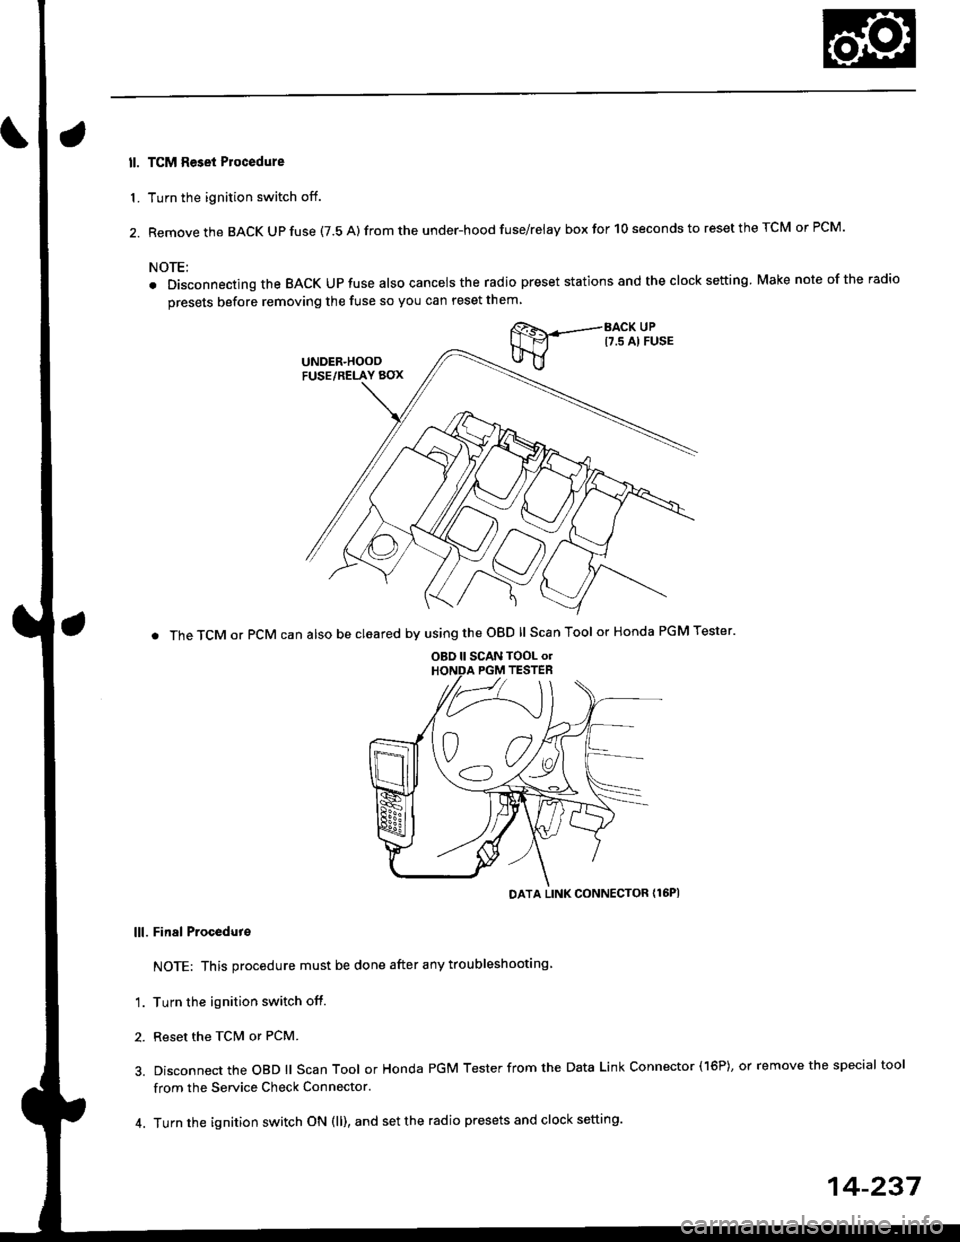 HONDA CIVIC 1996 6.G Workshop Manual ll. TCM Reset Plocedure
1. Turn the ignition switch off.
2. Remove the BACK Up fuse (7.5 A) from the under-hood fuse/relay box for 10 seconds to reset the TCM or PCM.
NOTE:
. Disconnecting the BACK UP